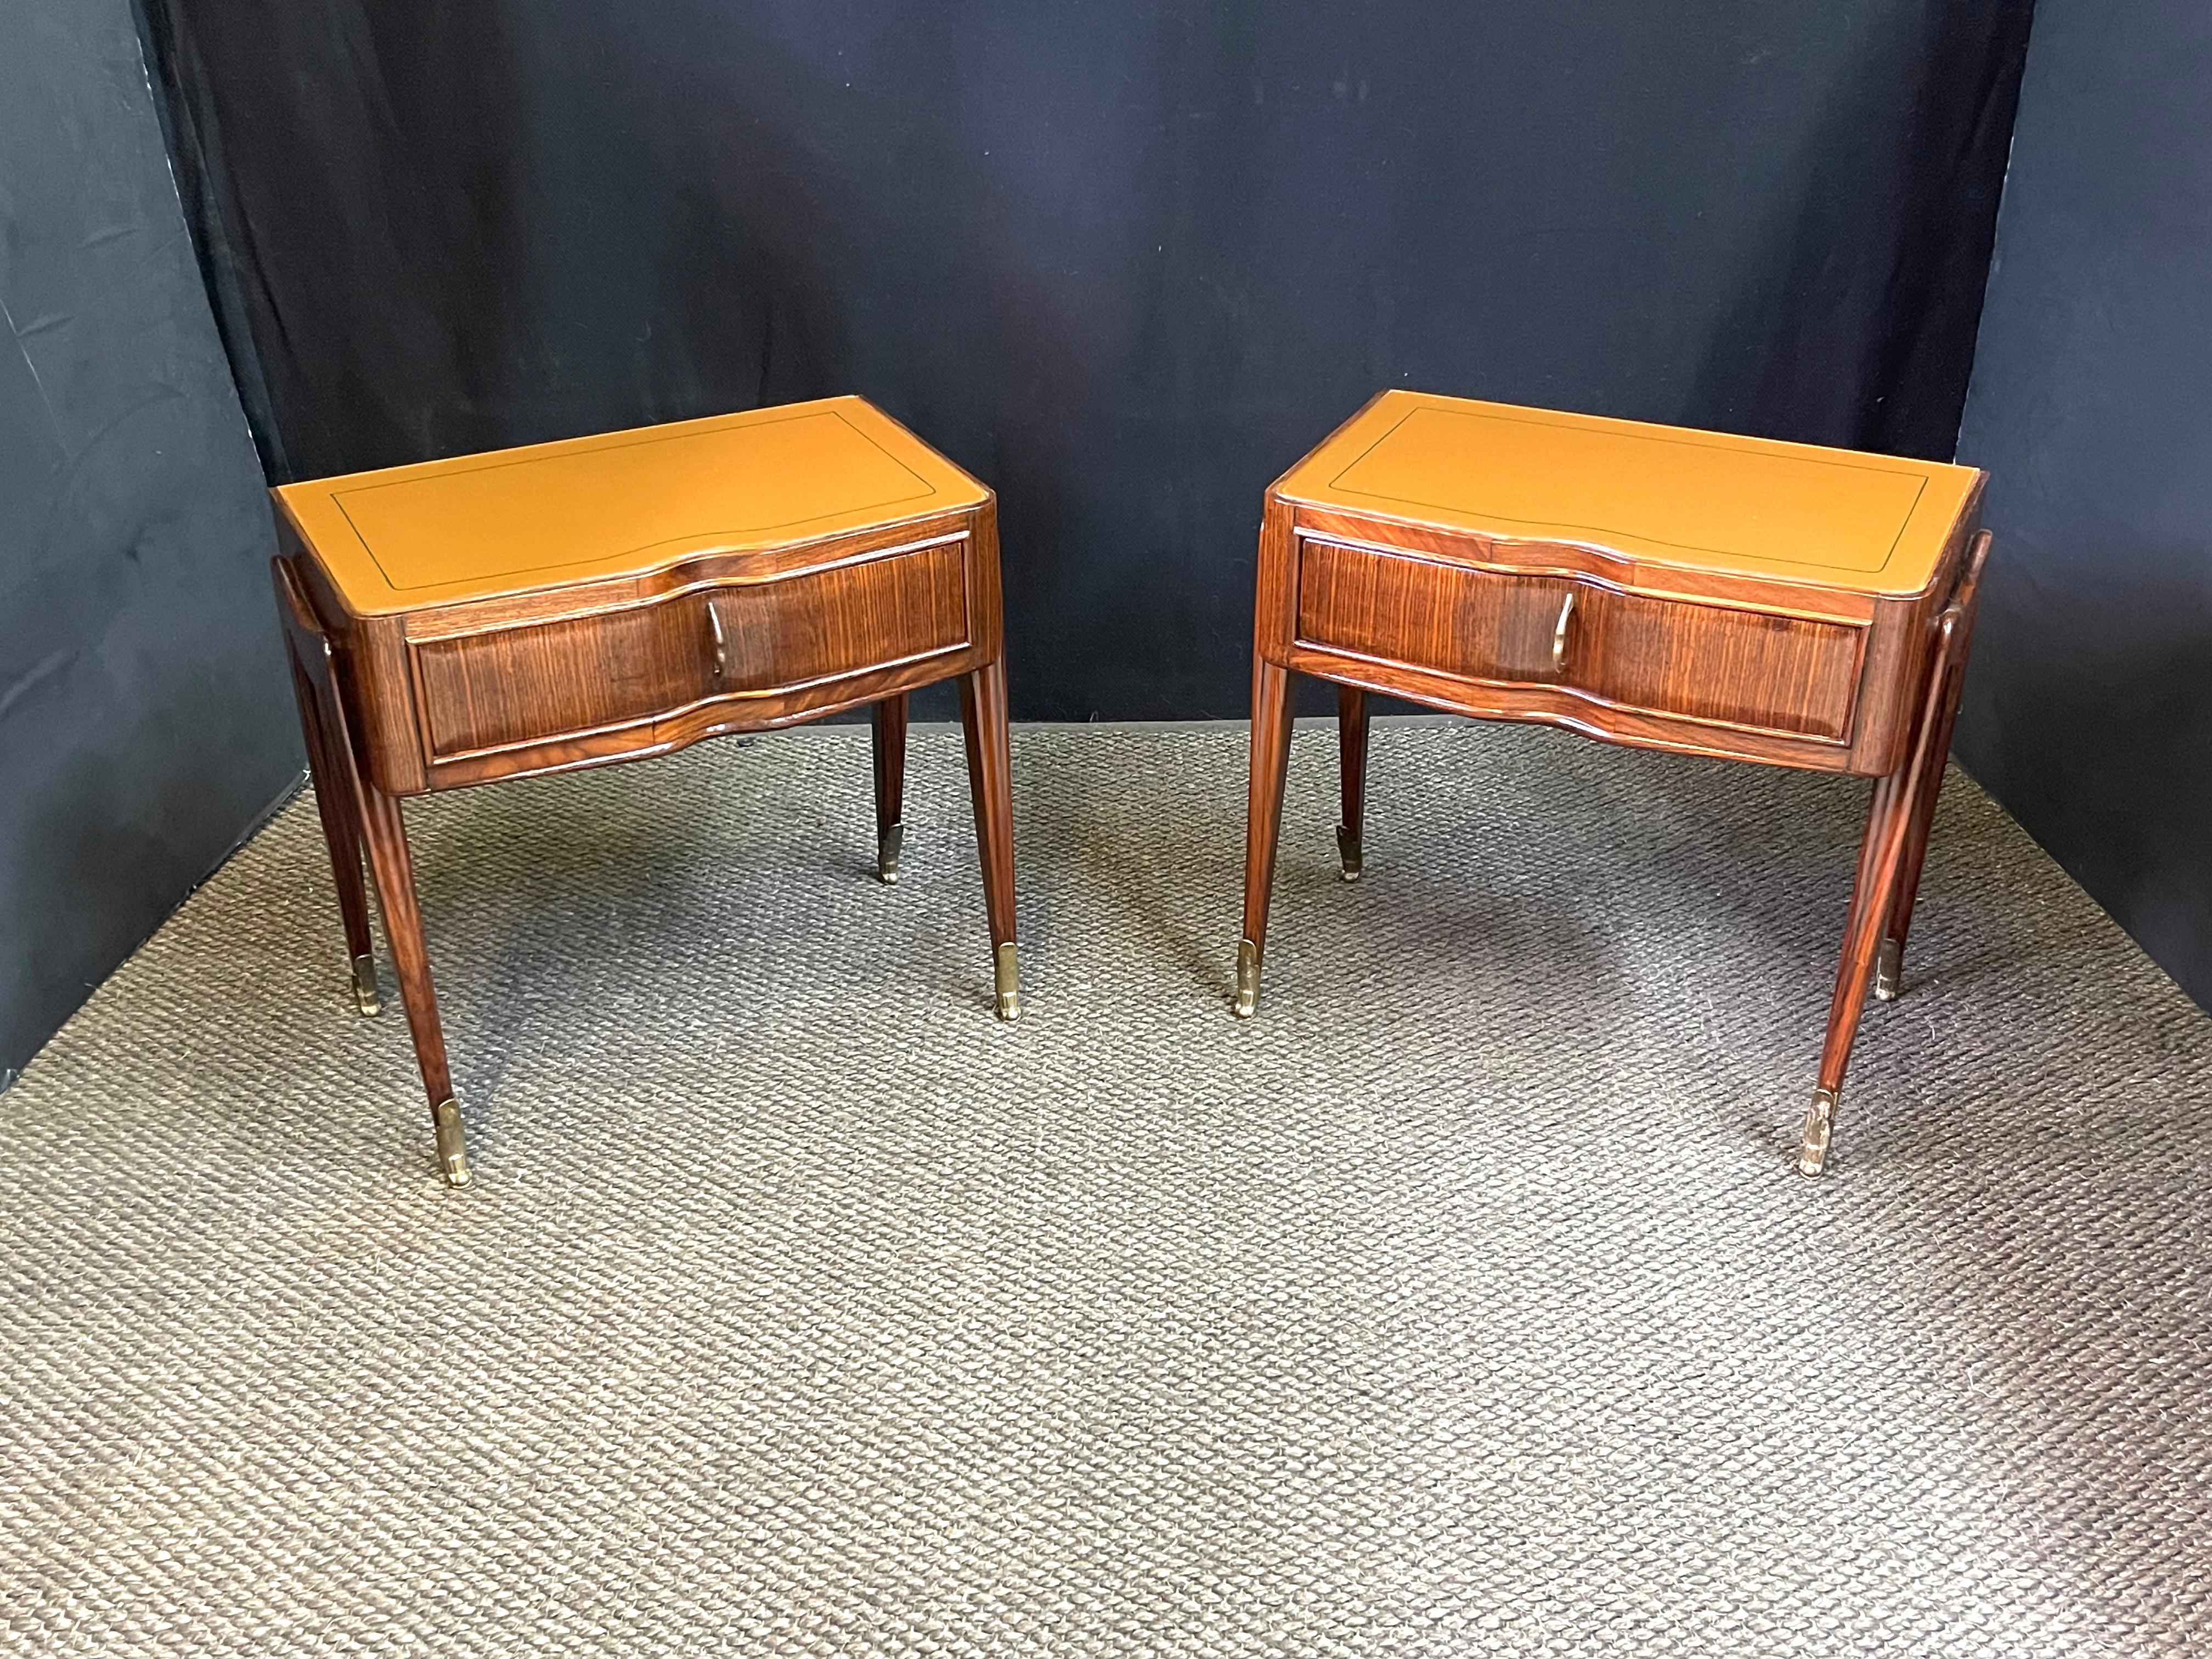 An elegant pair of Italian Mid-Century Modern bedside tables or nightstands in an original design by Vittorio Dassi. An artisan-made glass inset panel decorates each top in a neutral flesh tone with dark green trim. The shaped case is composed of an